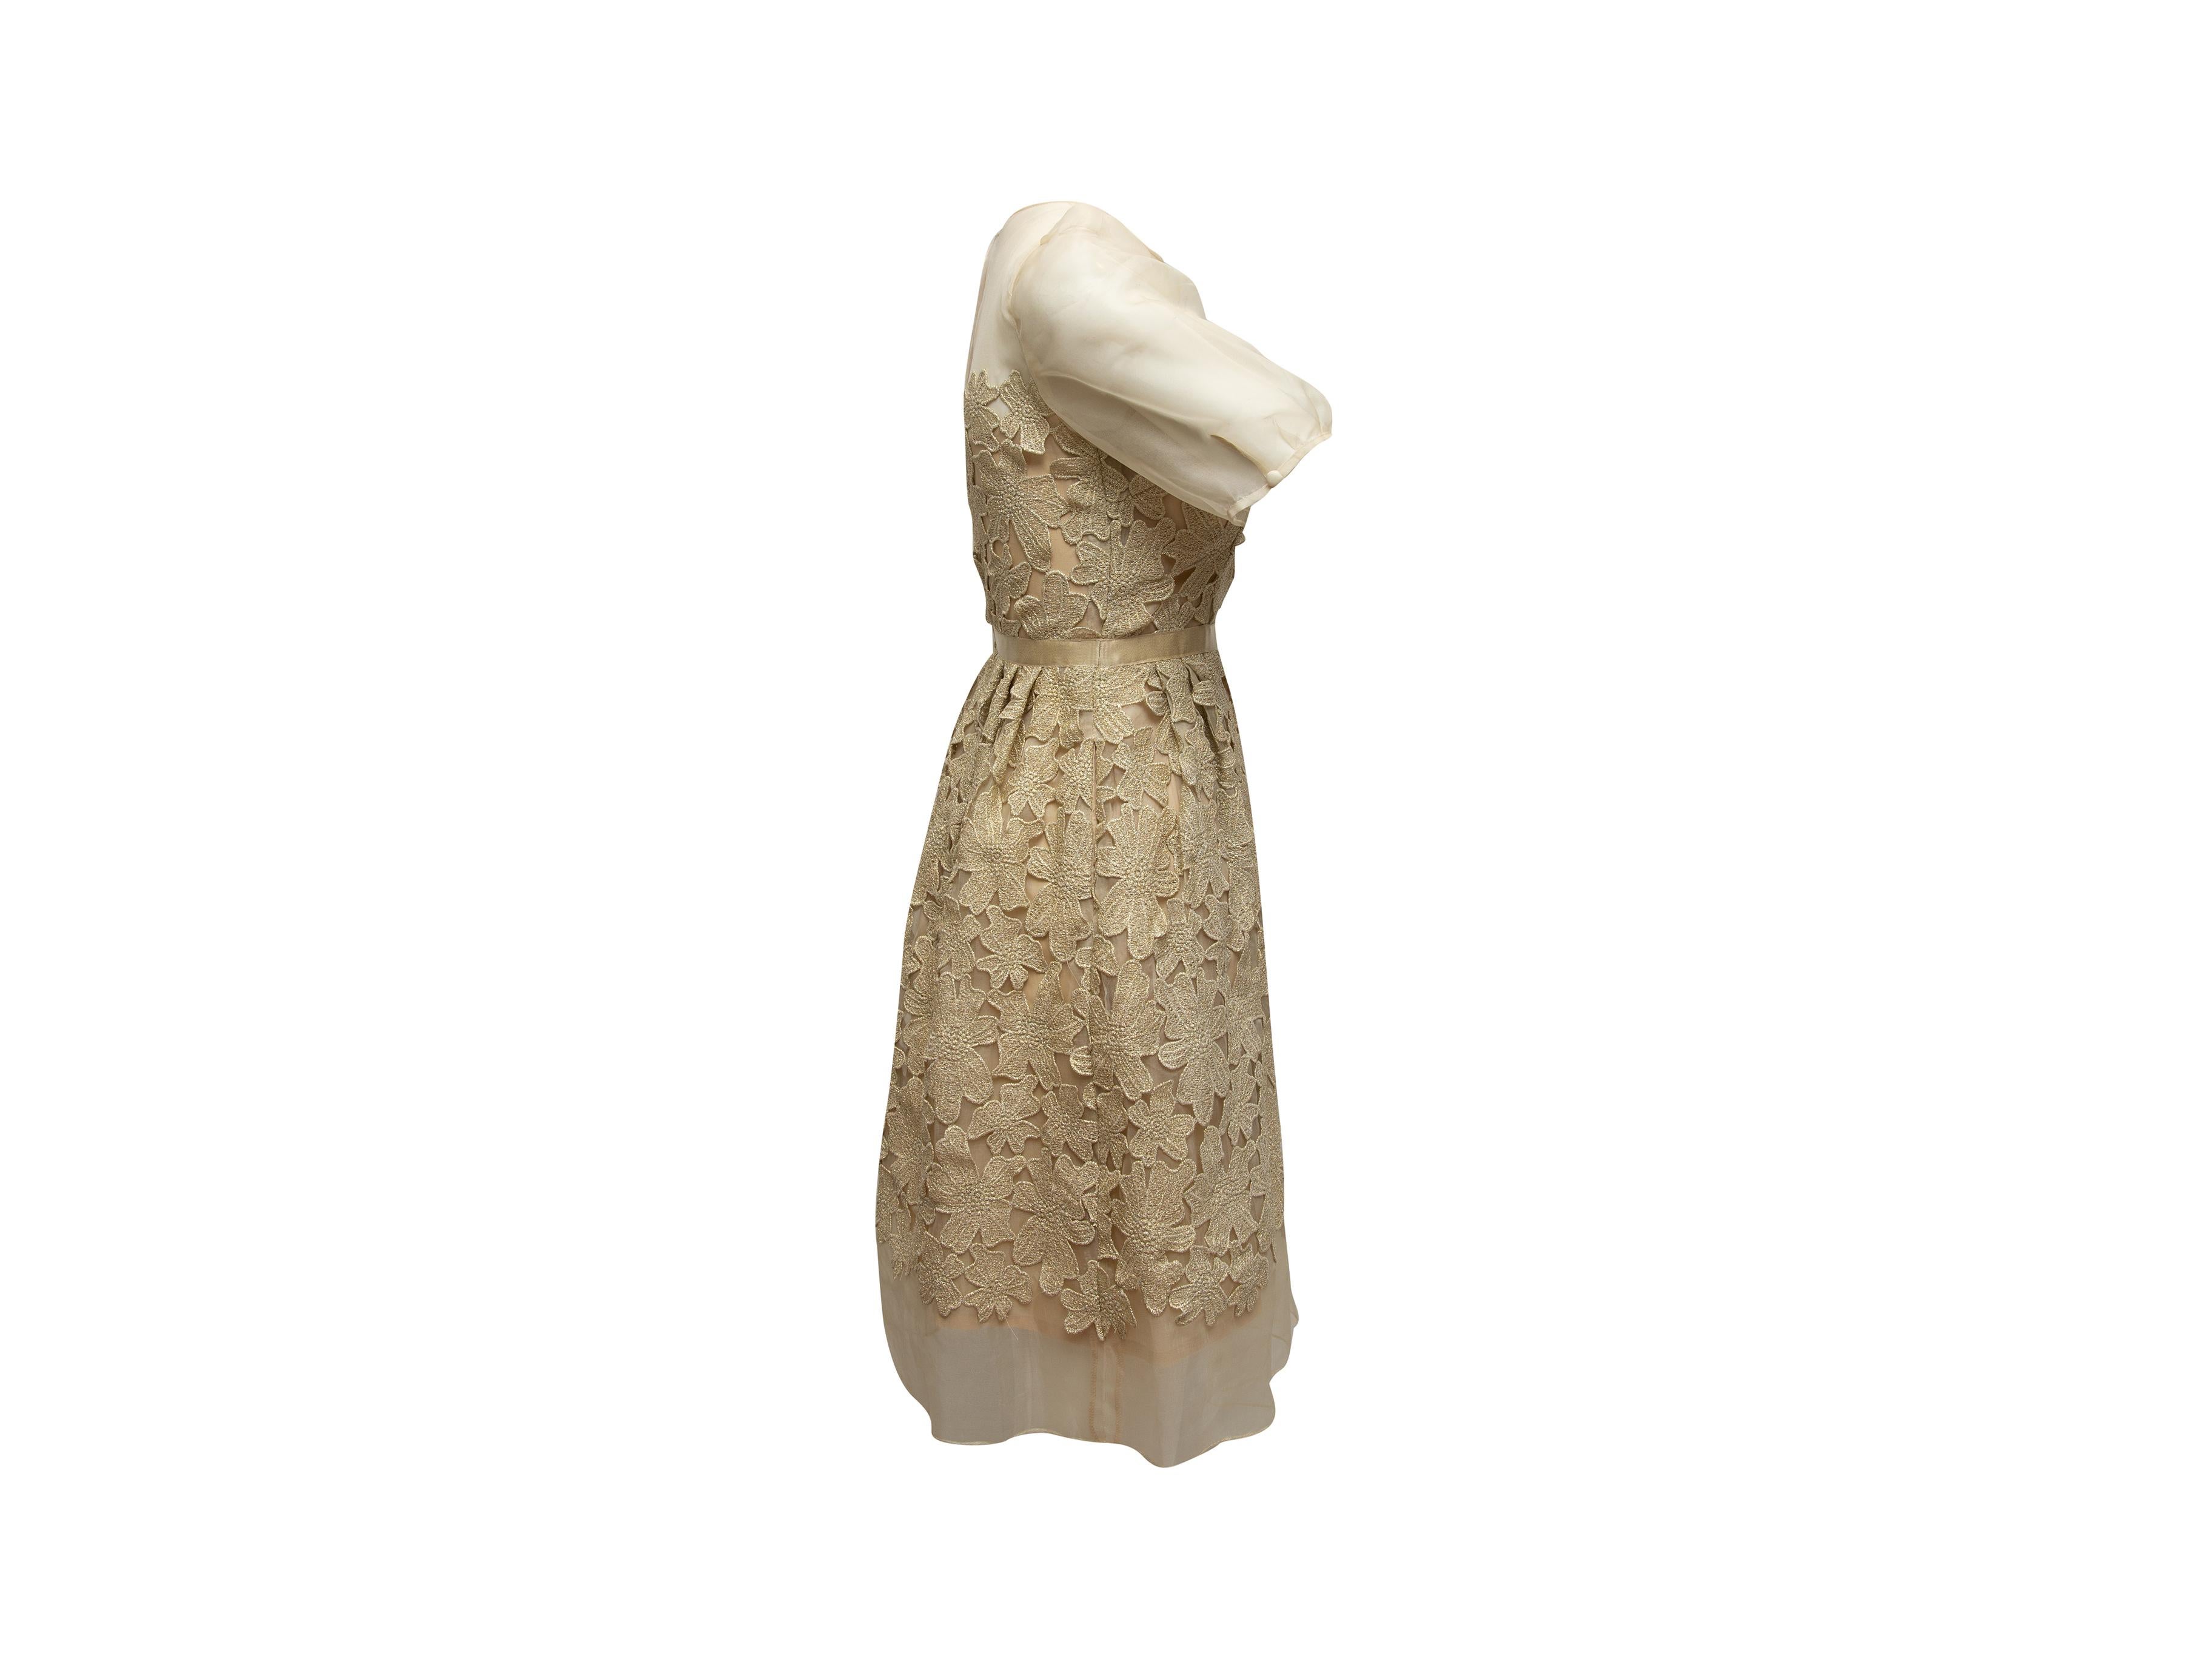 Product details: Beige and metallic gold floral patterned dress by Carmen Marc Valvo. Crew neck. Sheer short sleeves. Zip and button closures at back. 30